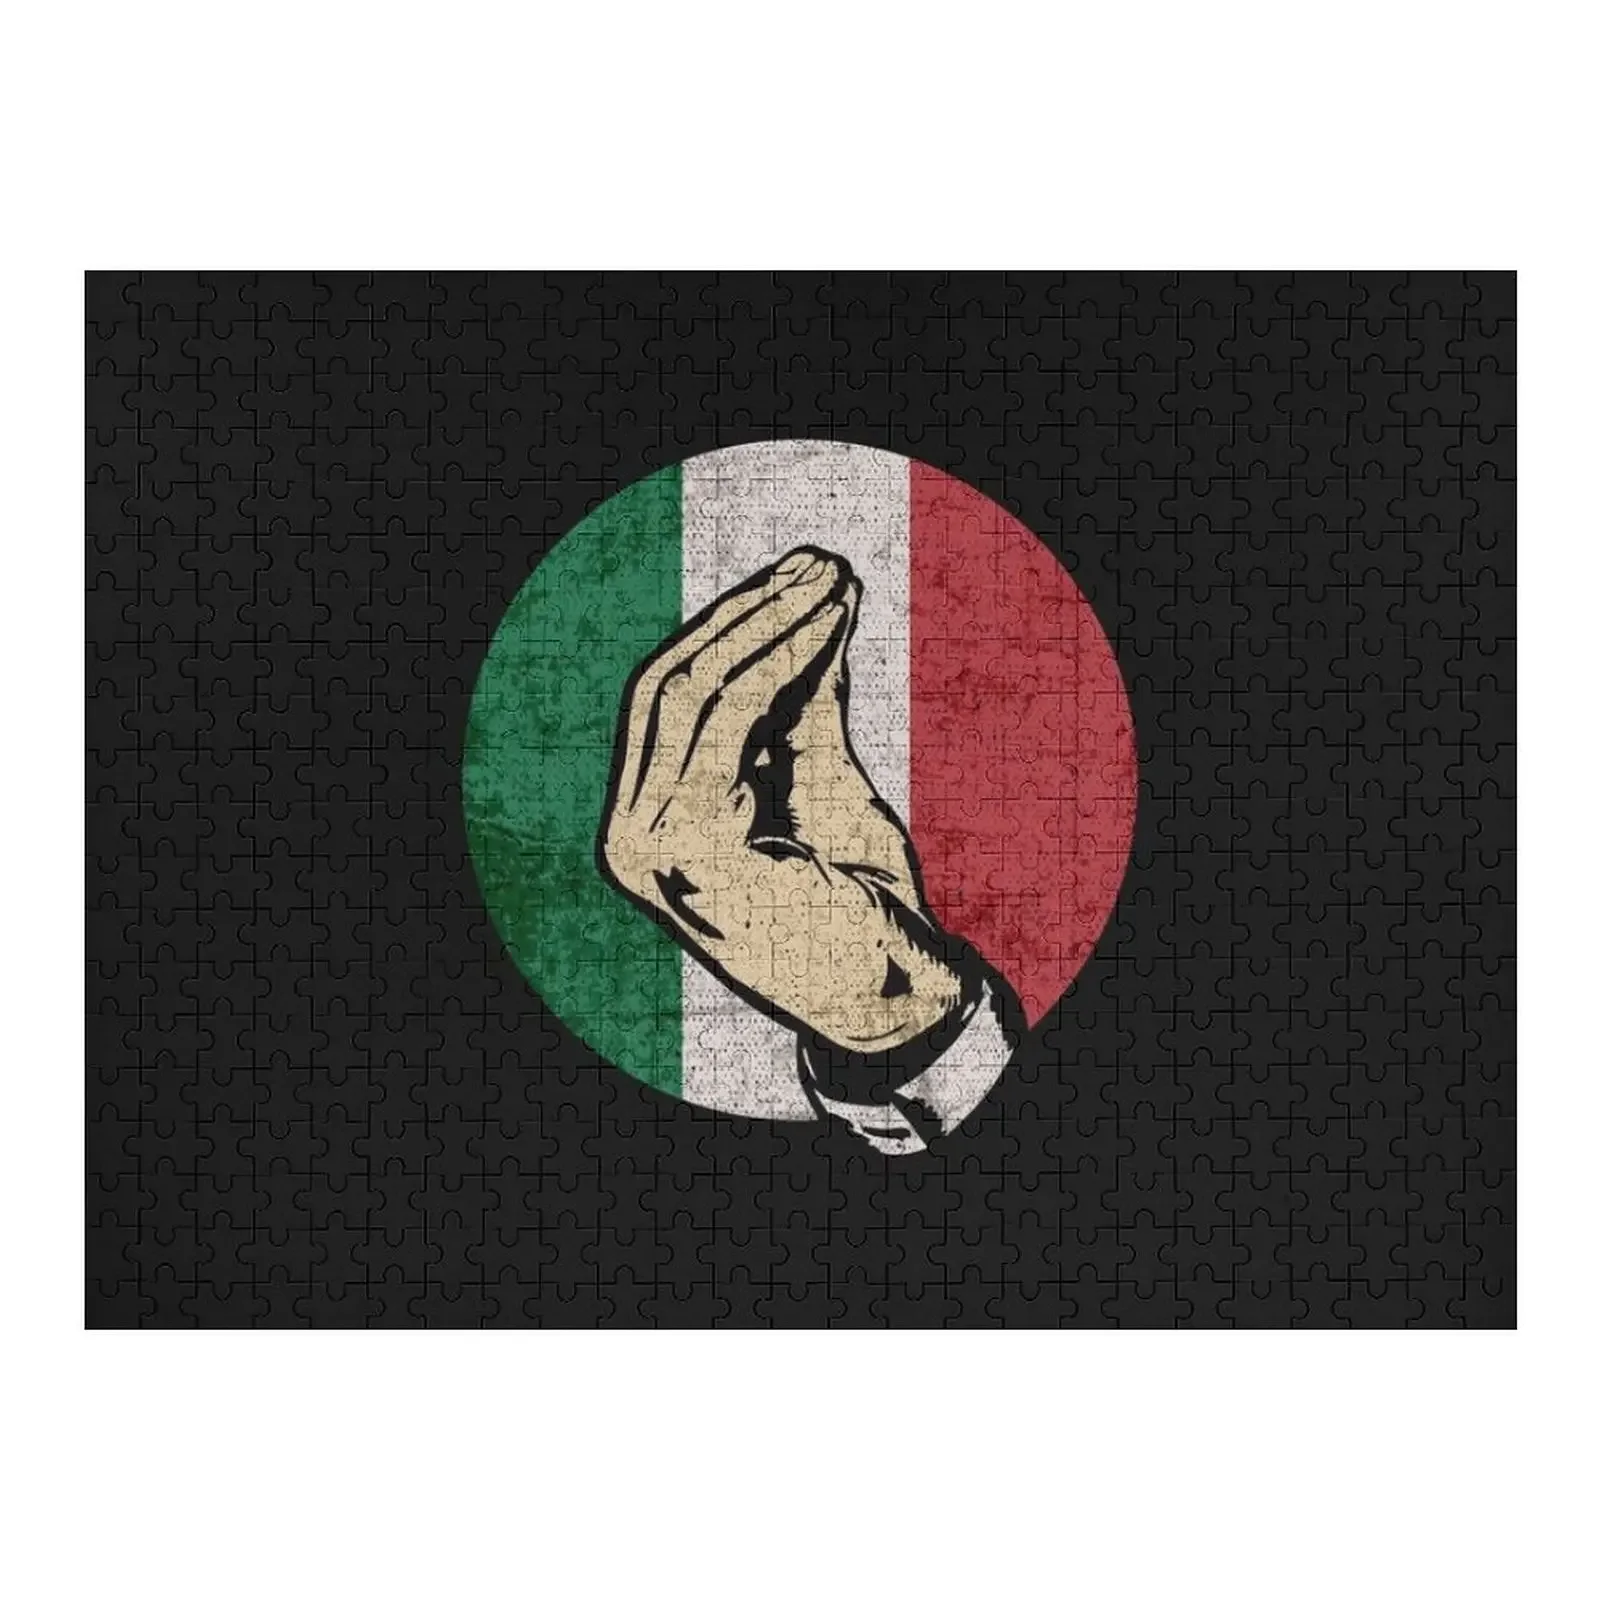 Italian Hand Gesture Sing Language Funny Italy Flag Vintage Jigsaw Puzzle Anime Puzzle our flag means death love night jigsaw puzzle picture anime wooden boxes puzzle